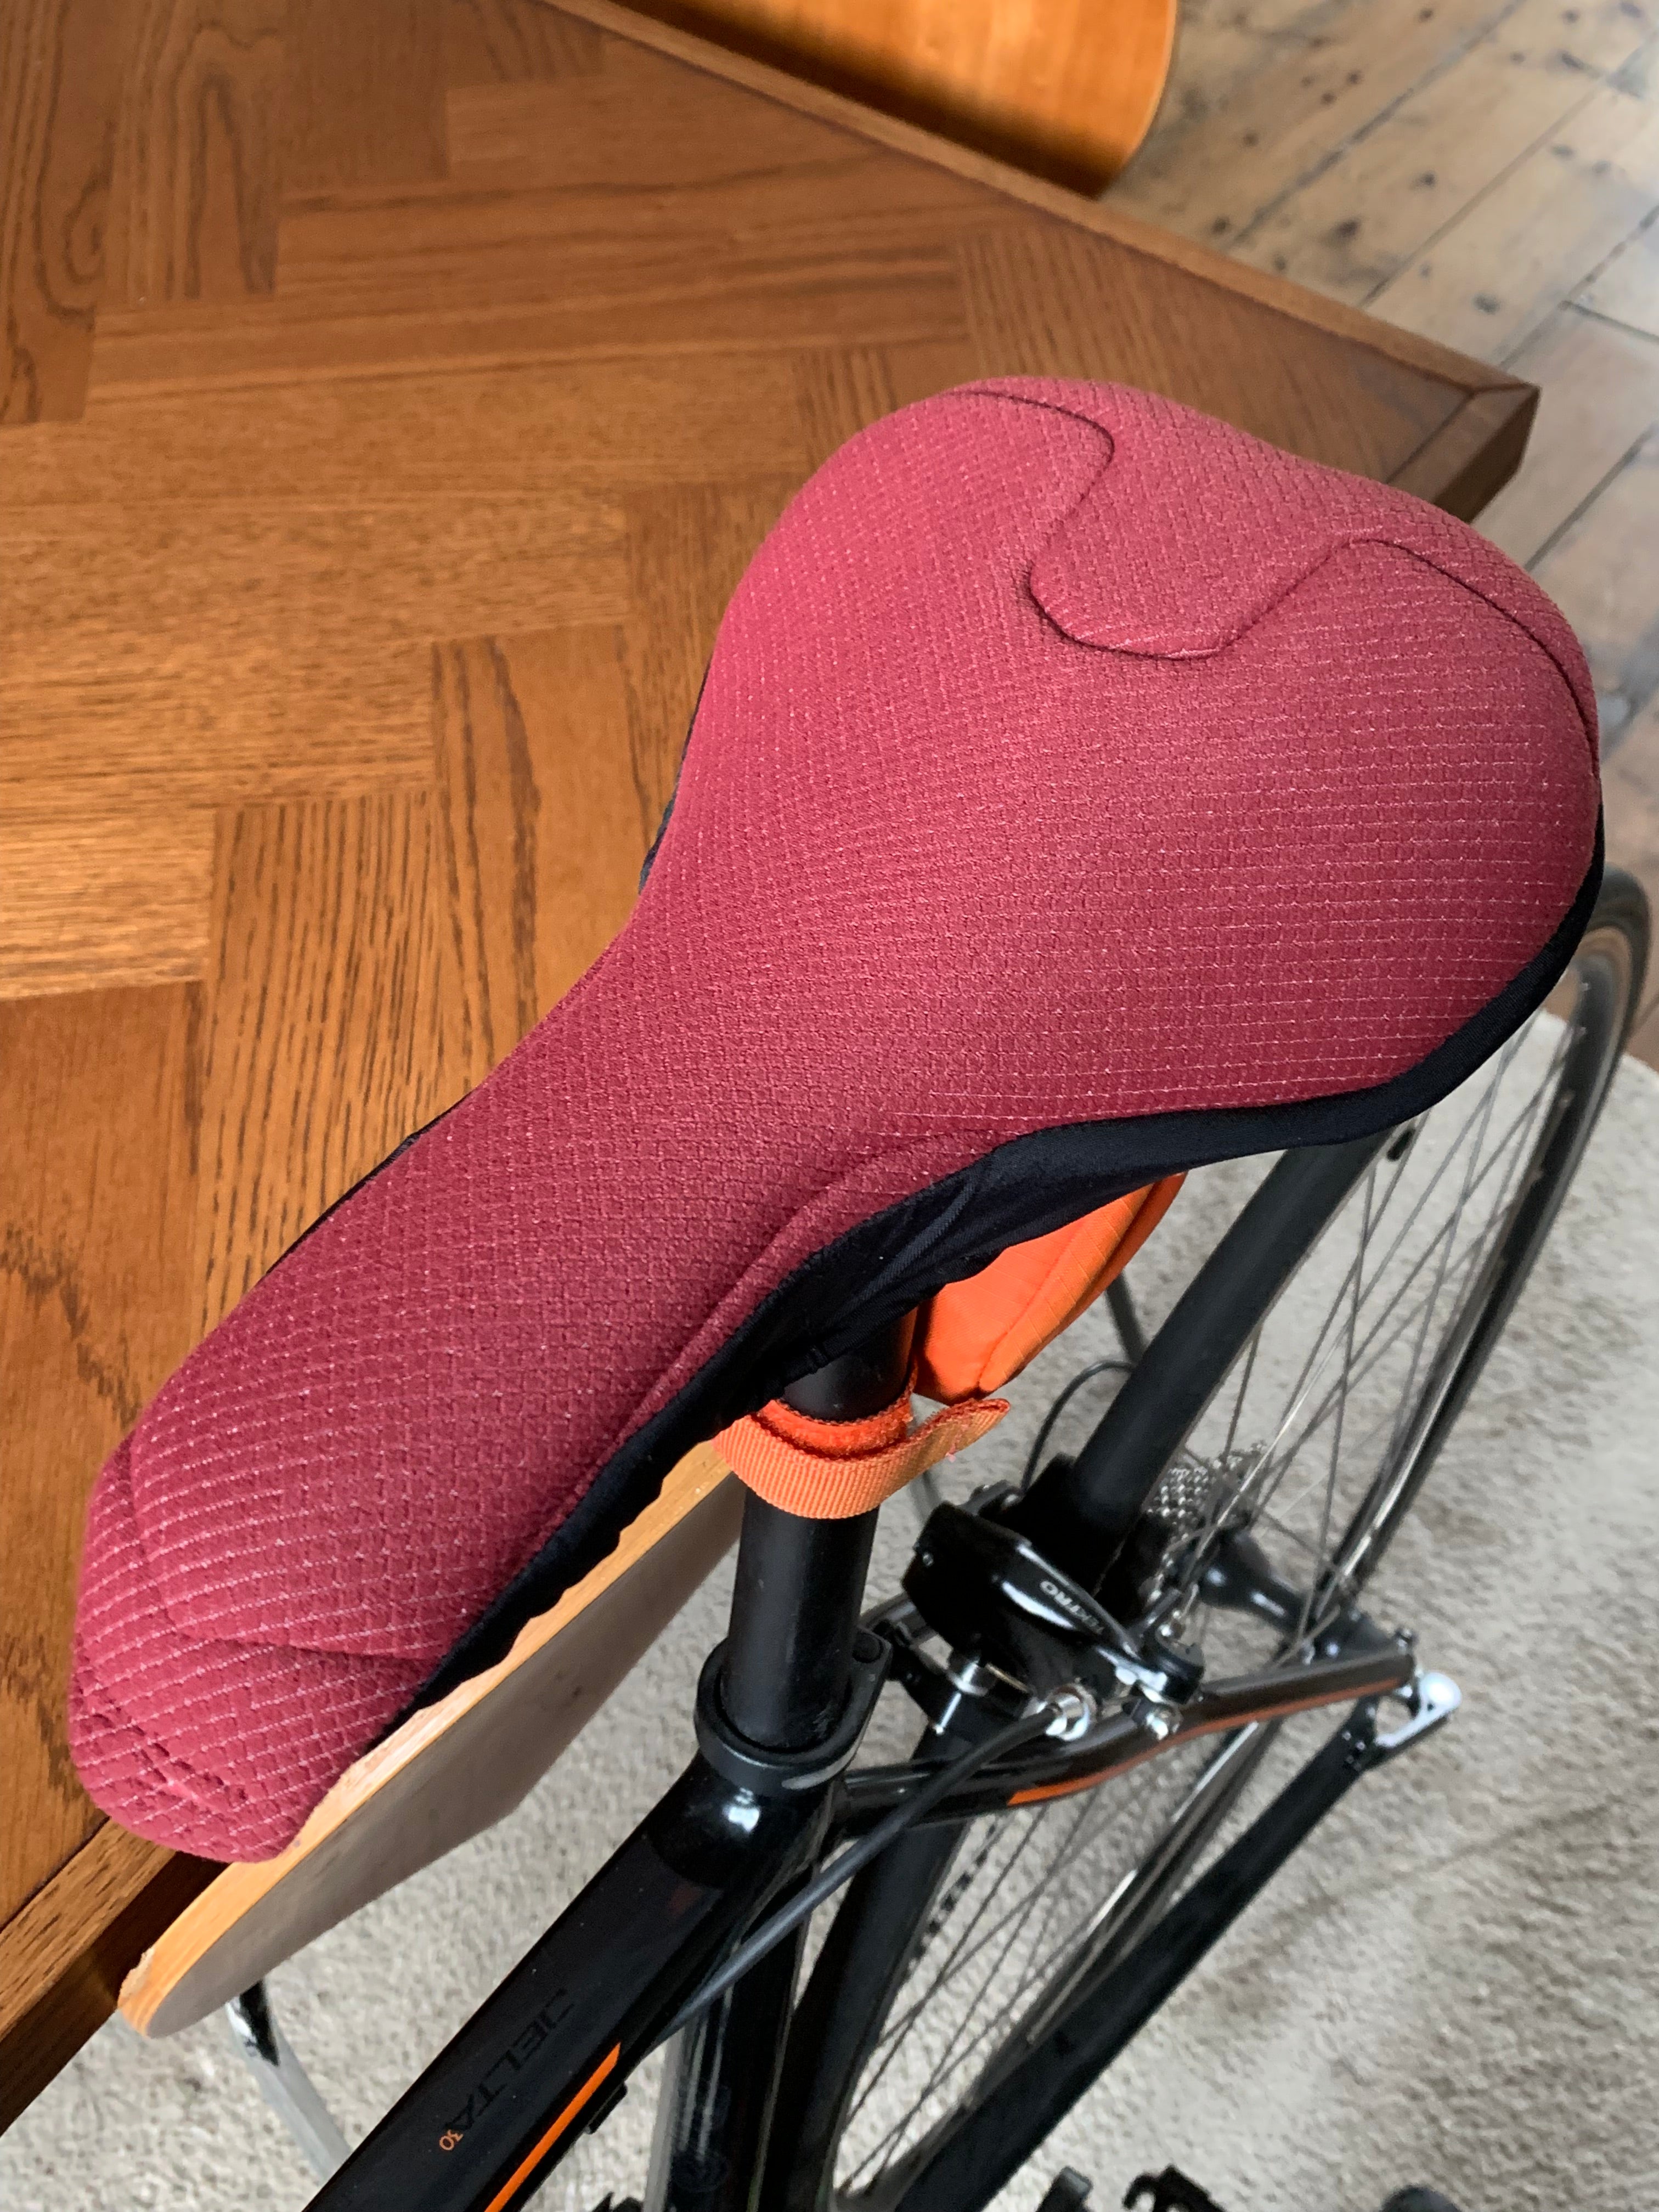 SPIN_Woman_Black_Ruby_Padded_Peloton_Bike_Seat_Cover_Endurance_Cycle_Training_by_Pedalshed